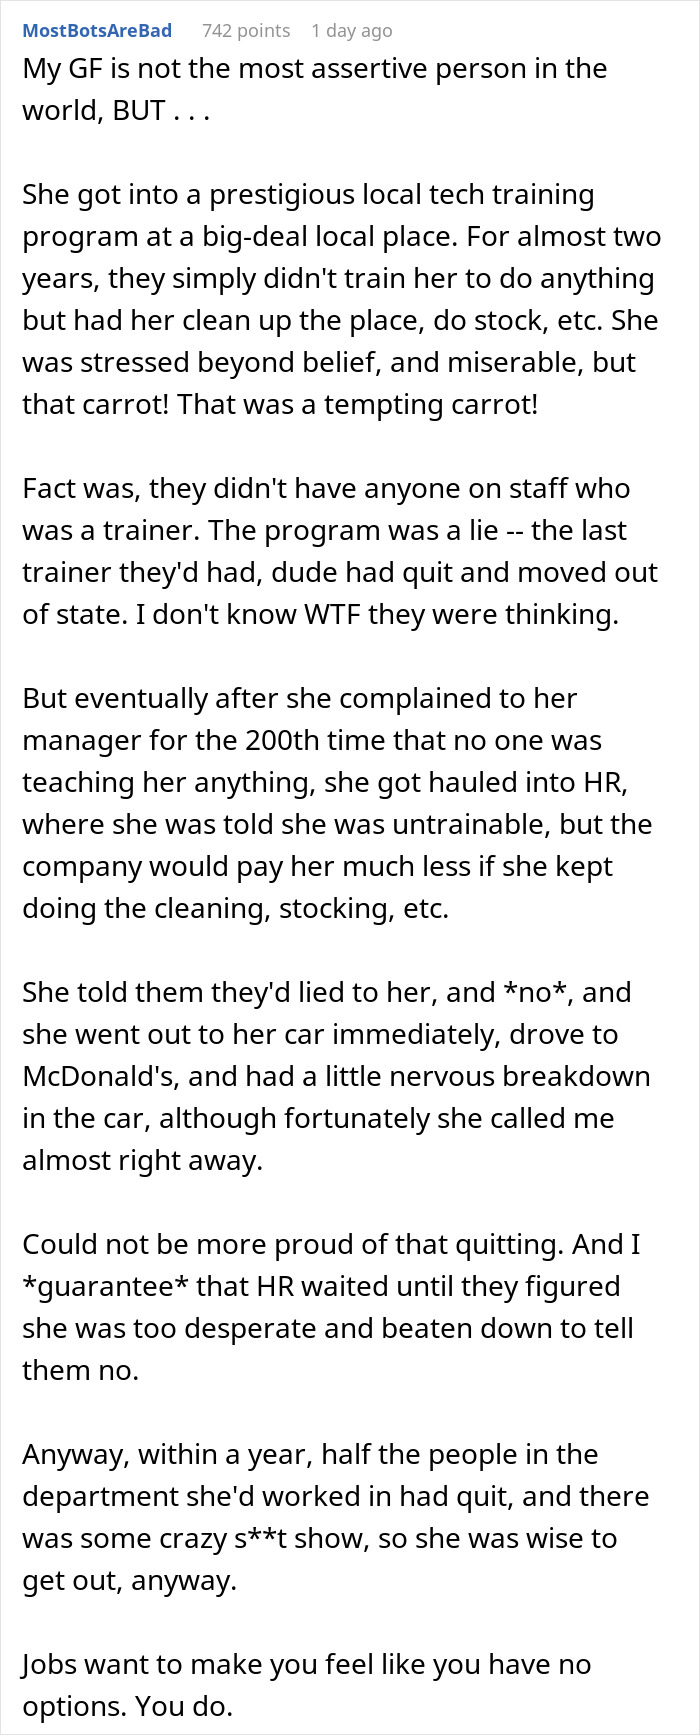 Company Tries To Gaslight This Person About Their 50% Wage Cut, They Don’t Waste A Second And Quit